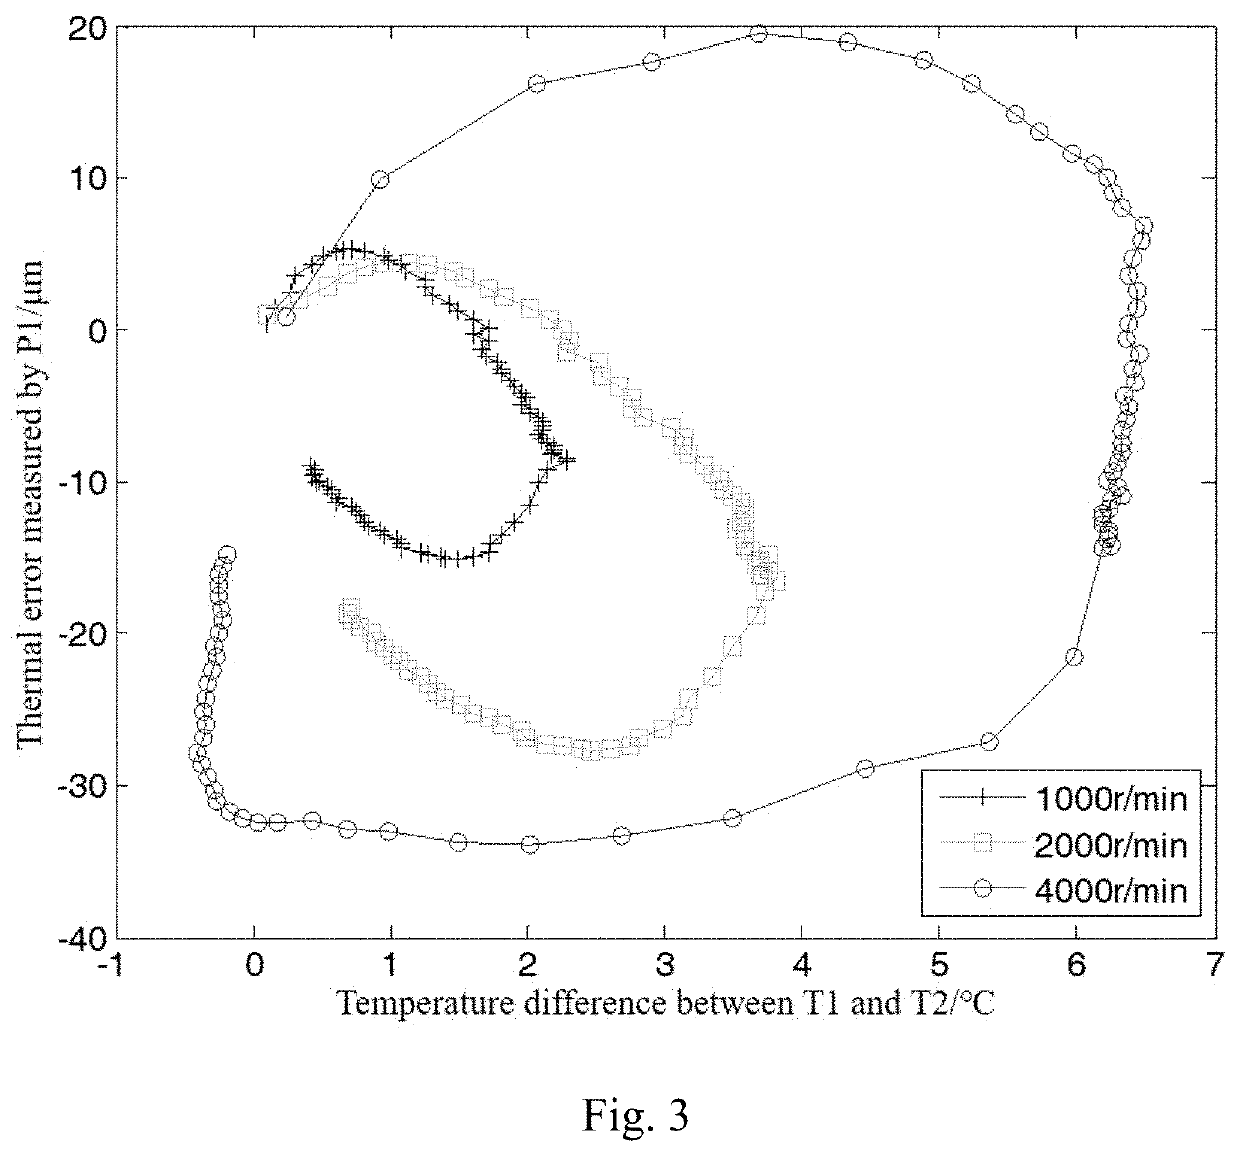 Application method of the thermal error-temperature loop in the spindle of a CNC machine tool